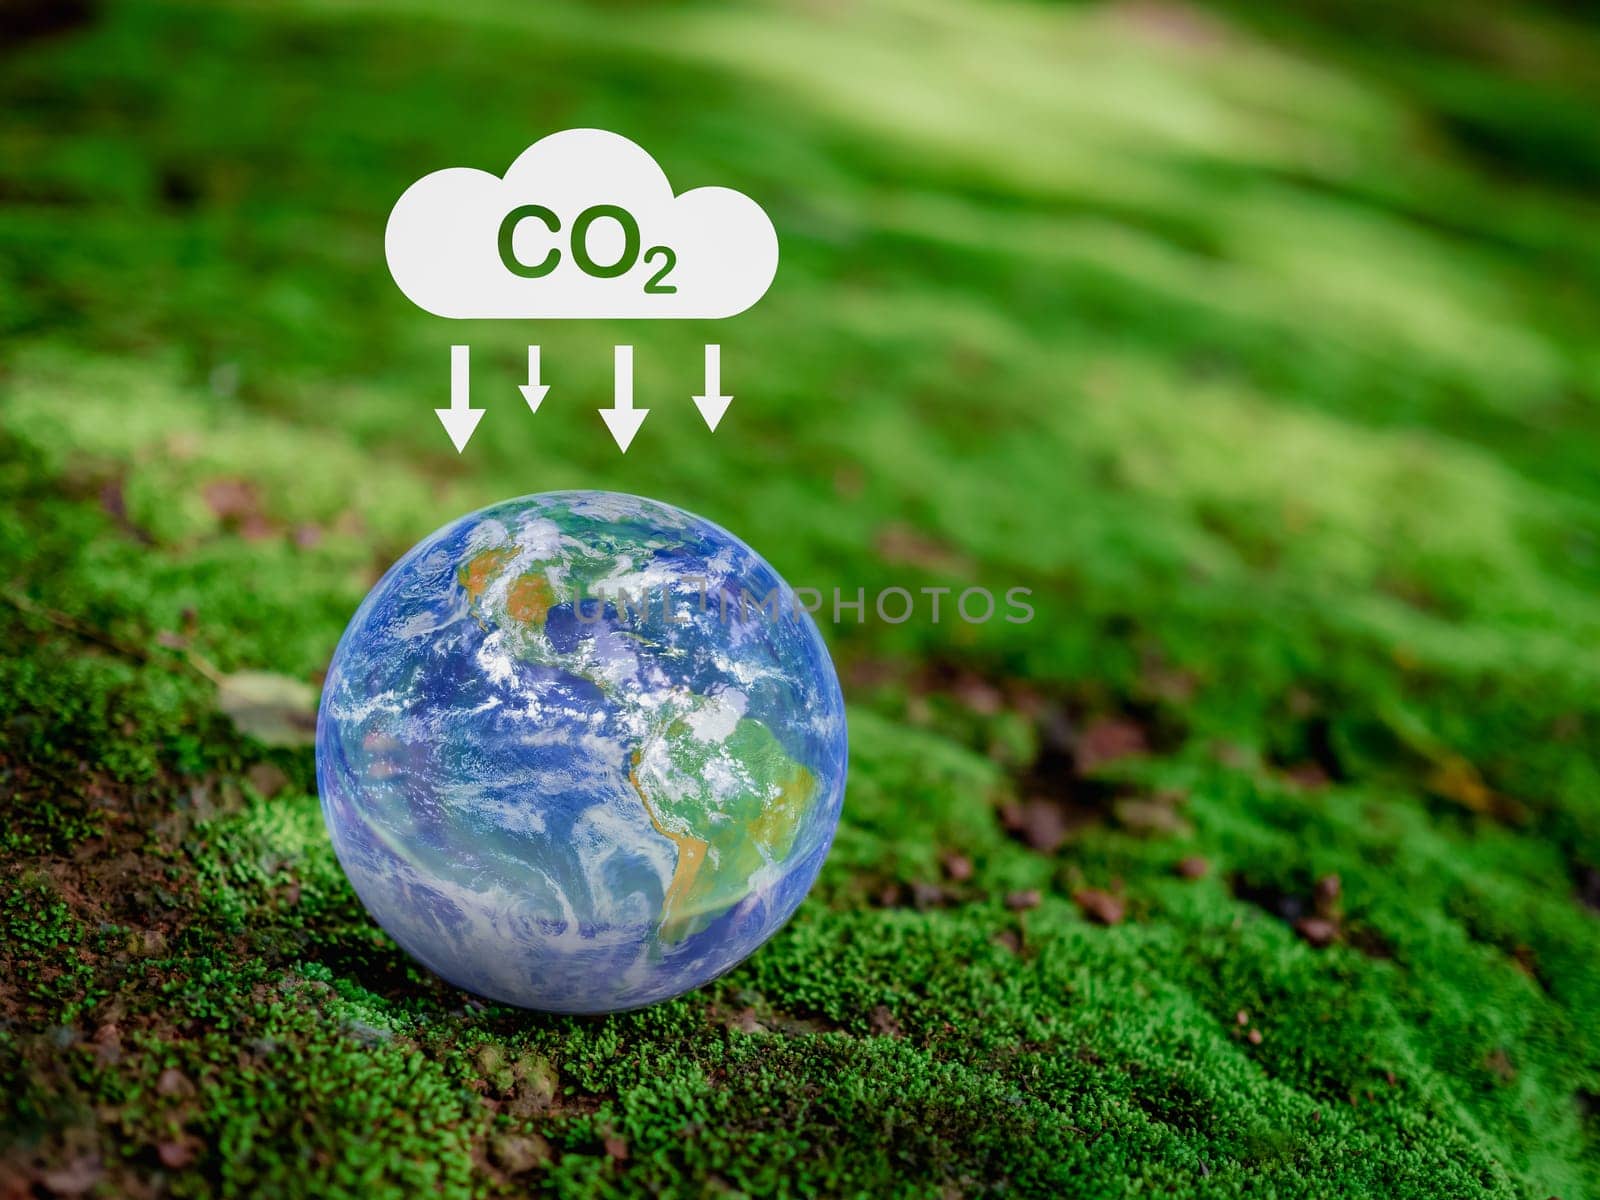 CO2 emission reduction concept, clean and friendly environment without carbon dioxide emissions. Planting trees to reduce CO2 emissions, environmental protection concept. element of NASA by Unimages2527